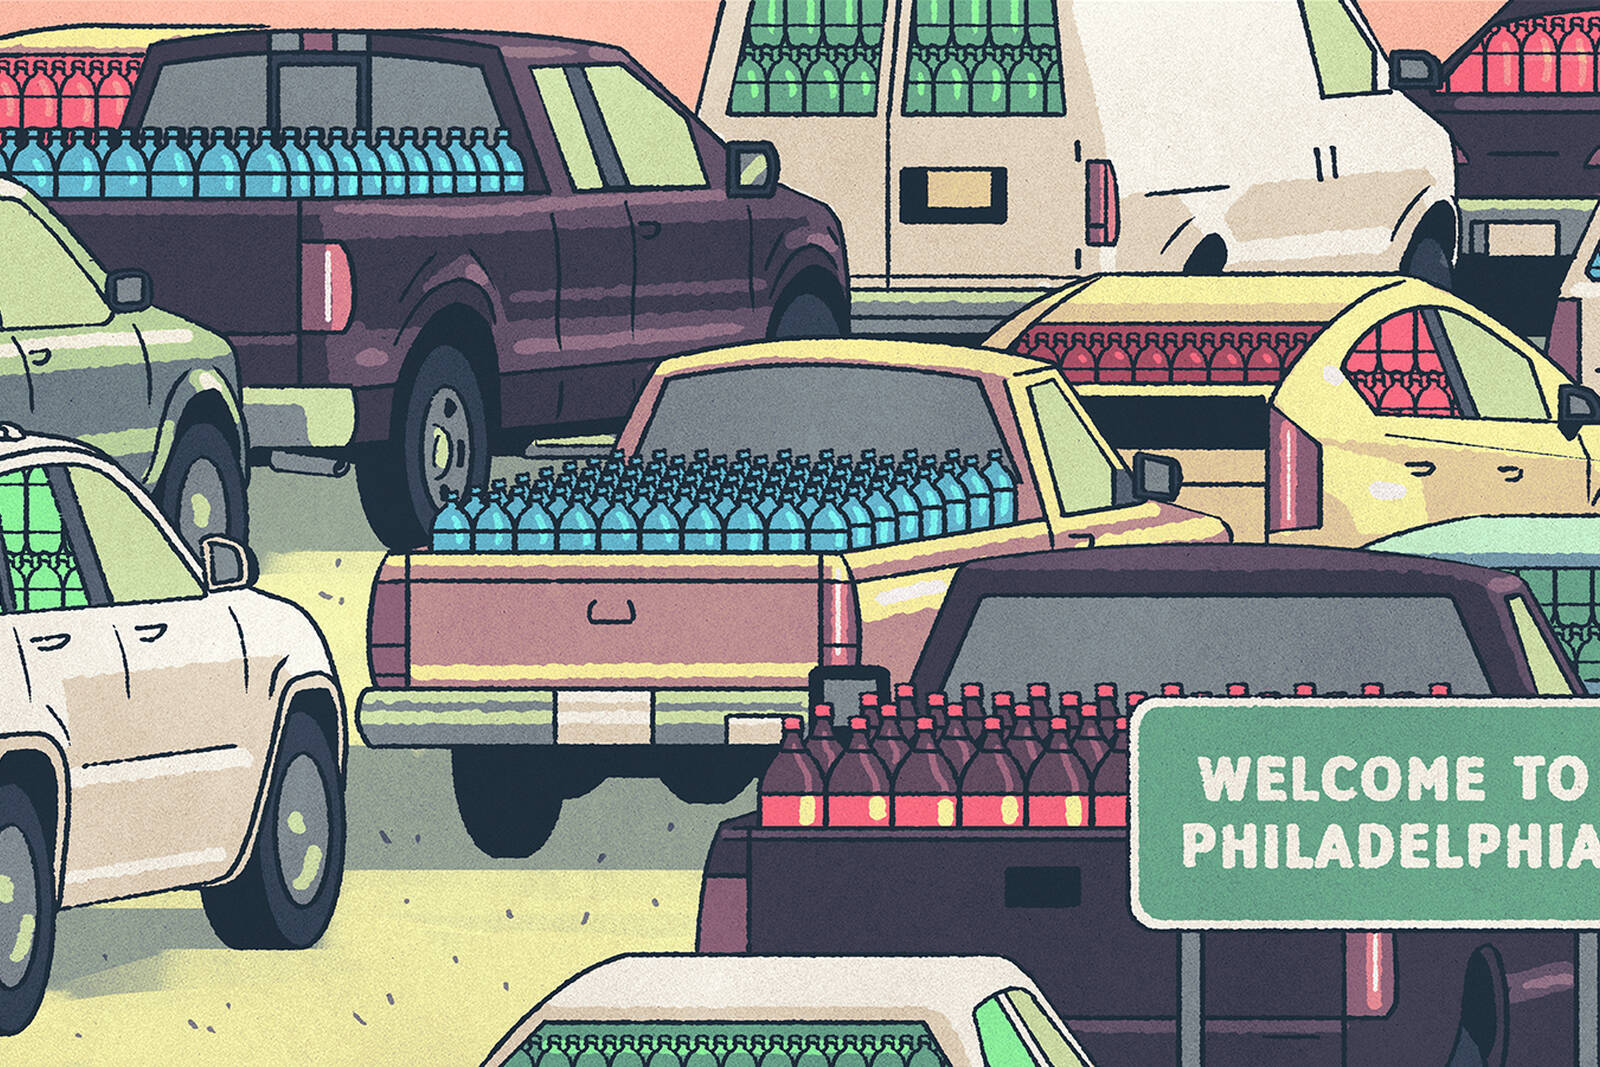 Philadelphia's soda tax did not work as intended.